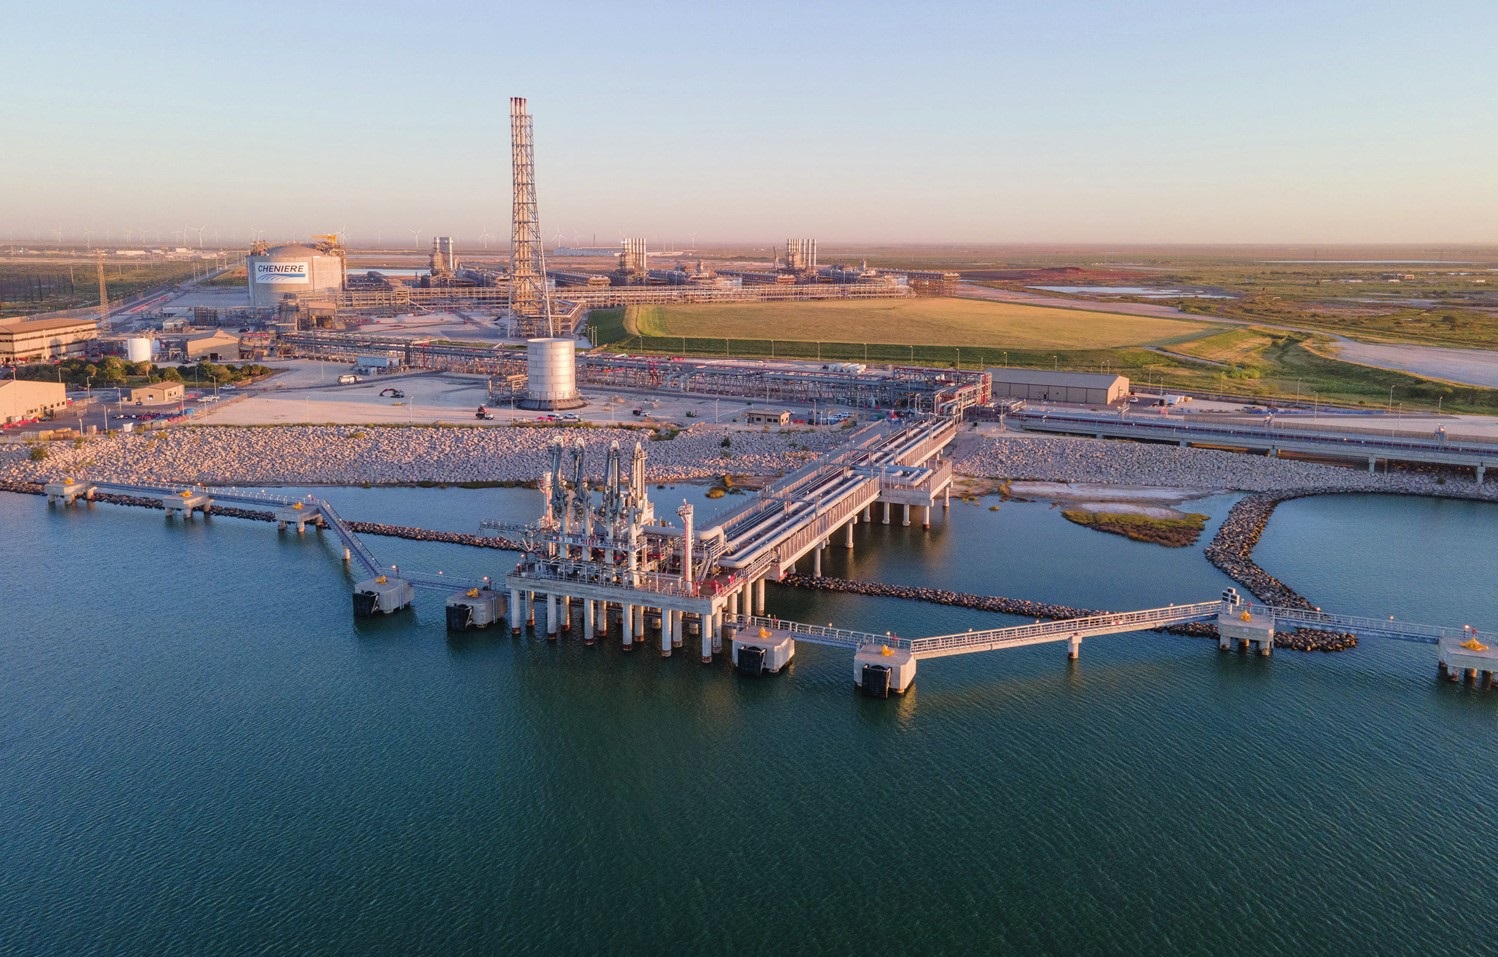 EIA US weekly LNG exports reach 20 cargoes